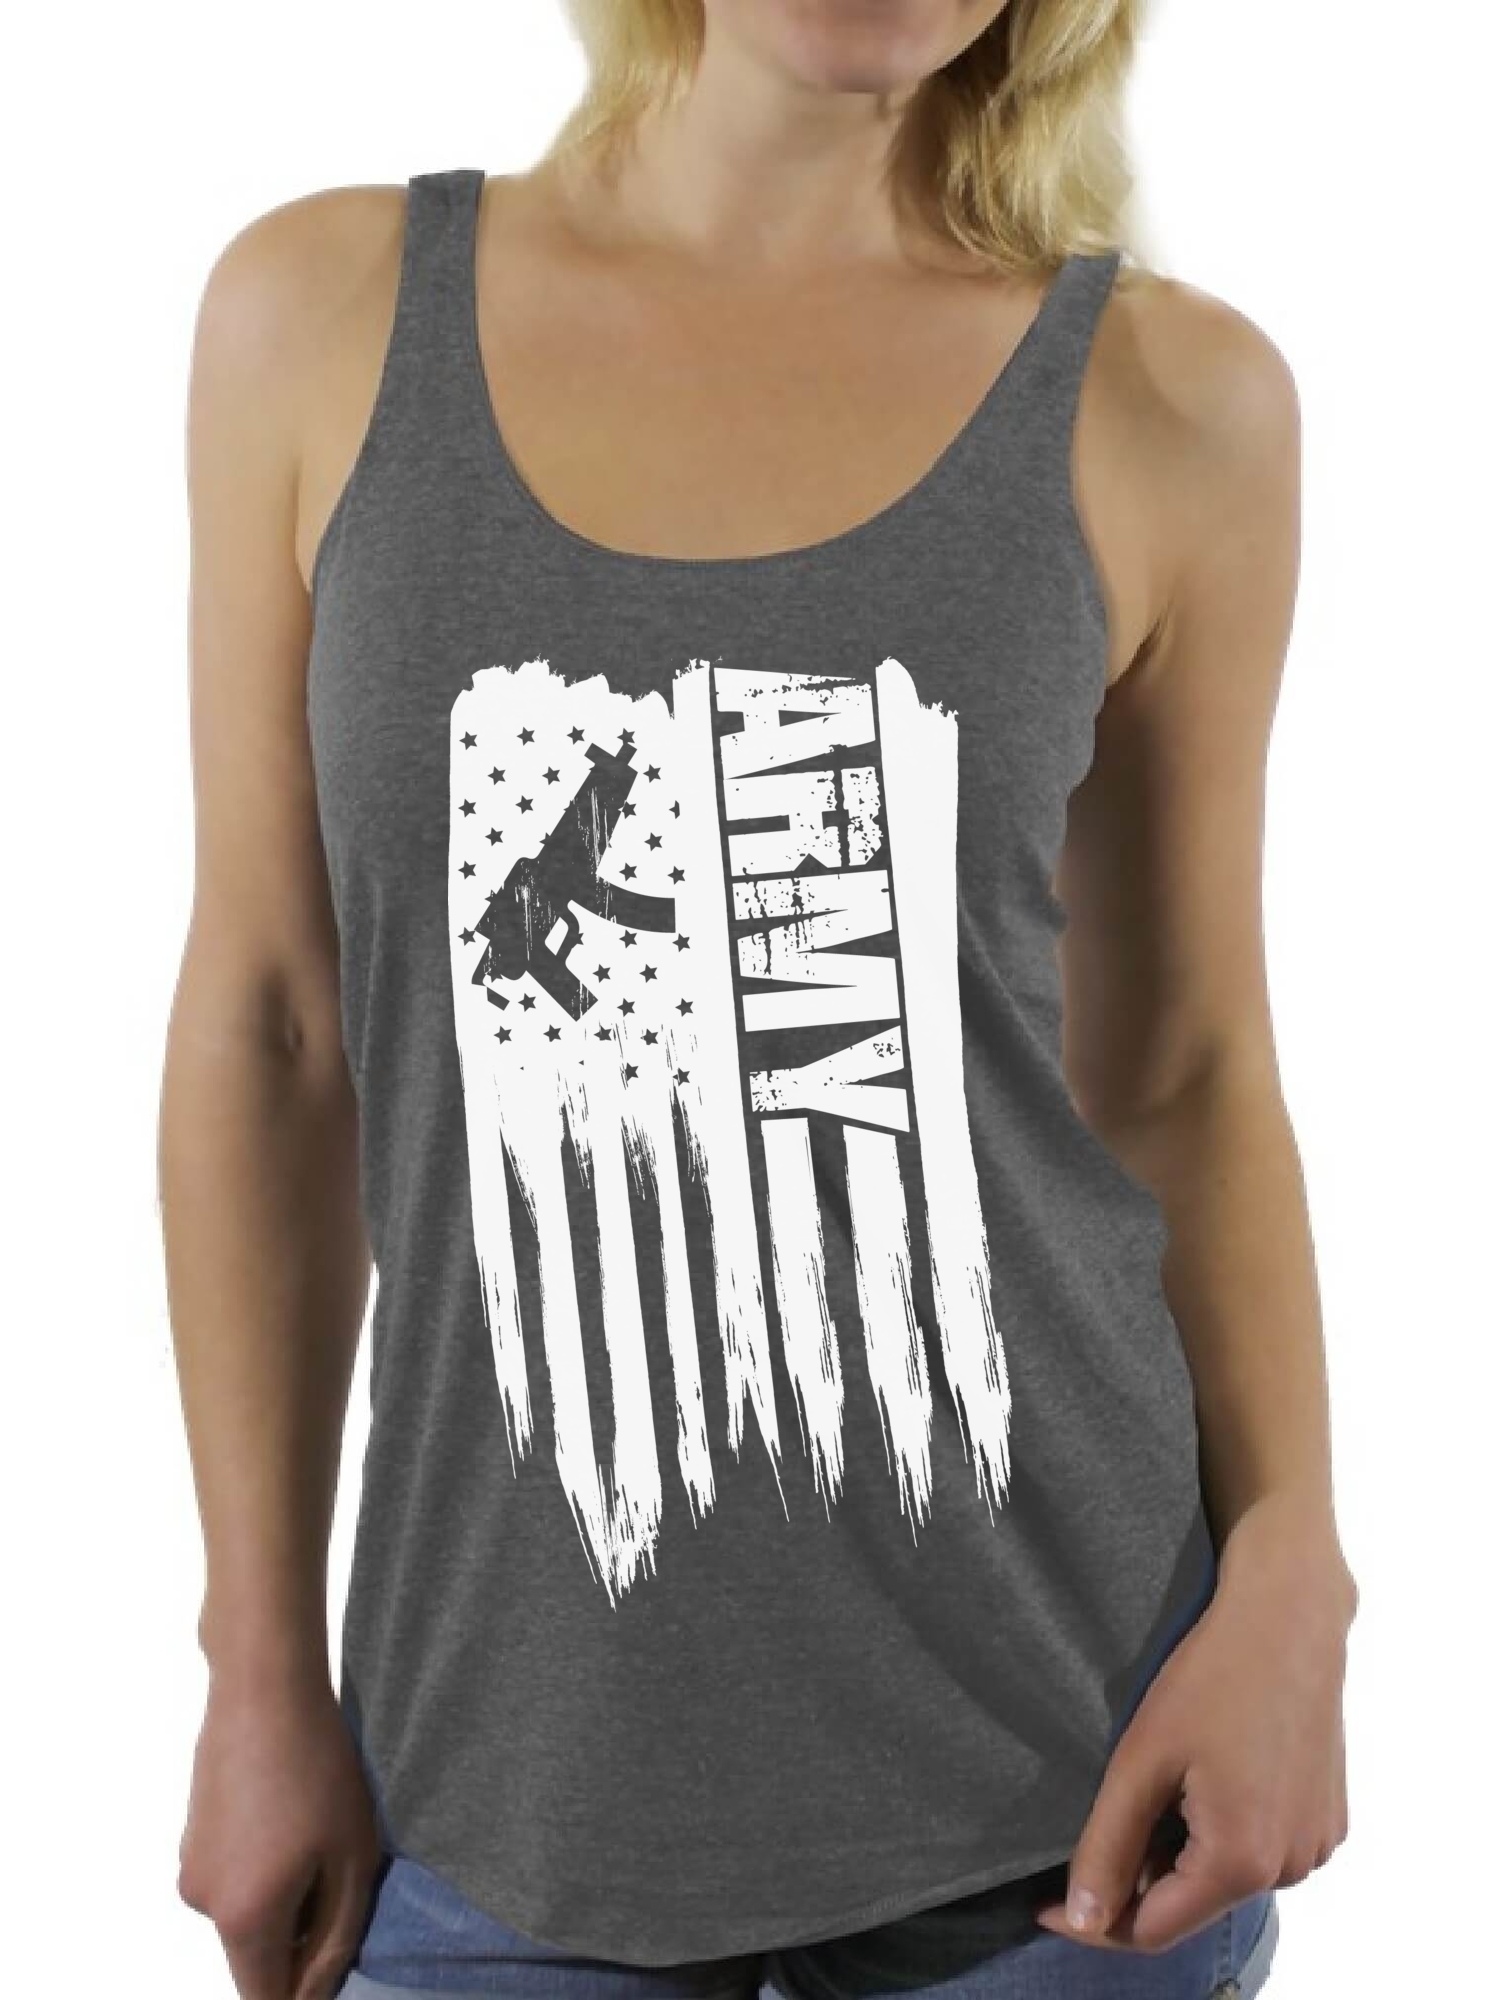 Awkward Styles American Flag Army Women Racerback Tank Top 4th of July Gifts USA Flag Army Shirt for Women Made in the USA Vintage USA Army Women Tank USA Pride Military Top for Women - image 1 of 4